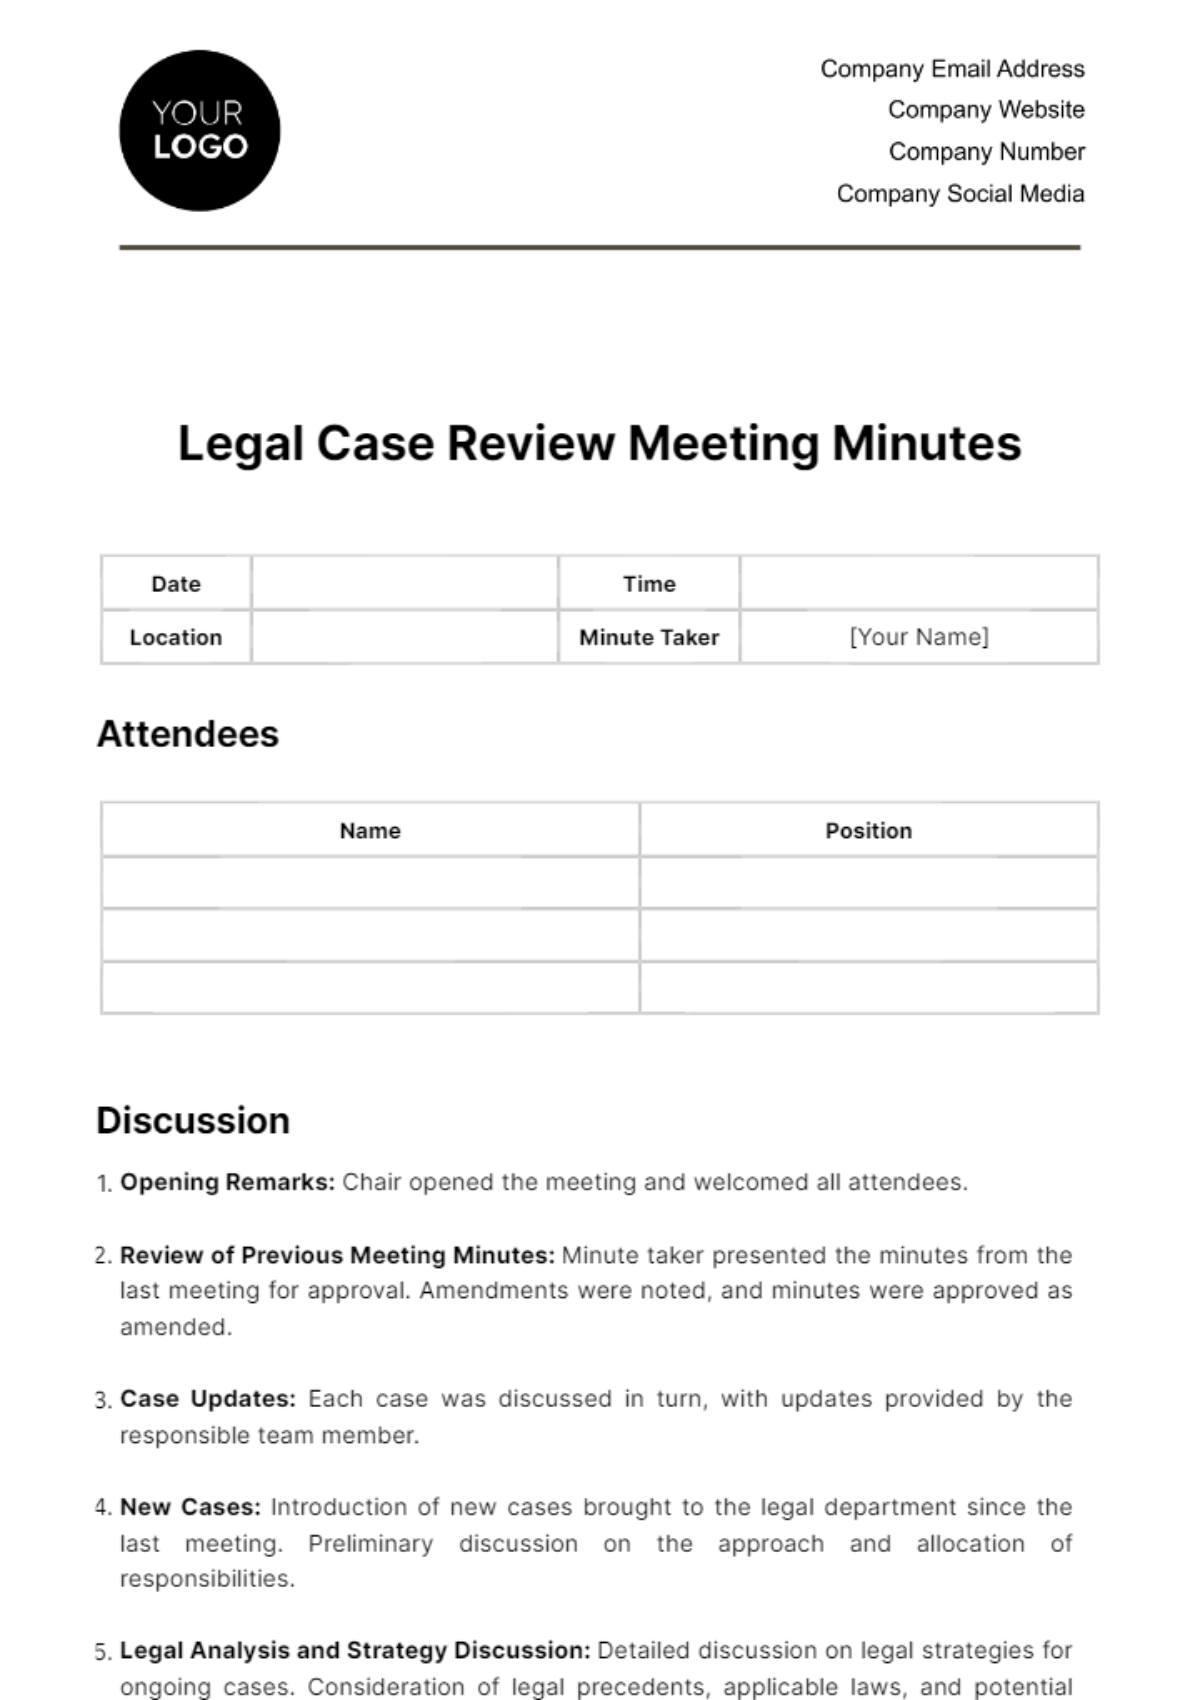 Free Legal Case Review Meeting Minutes Template